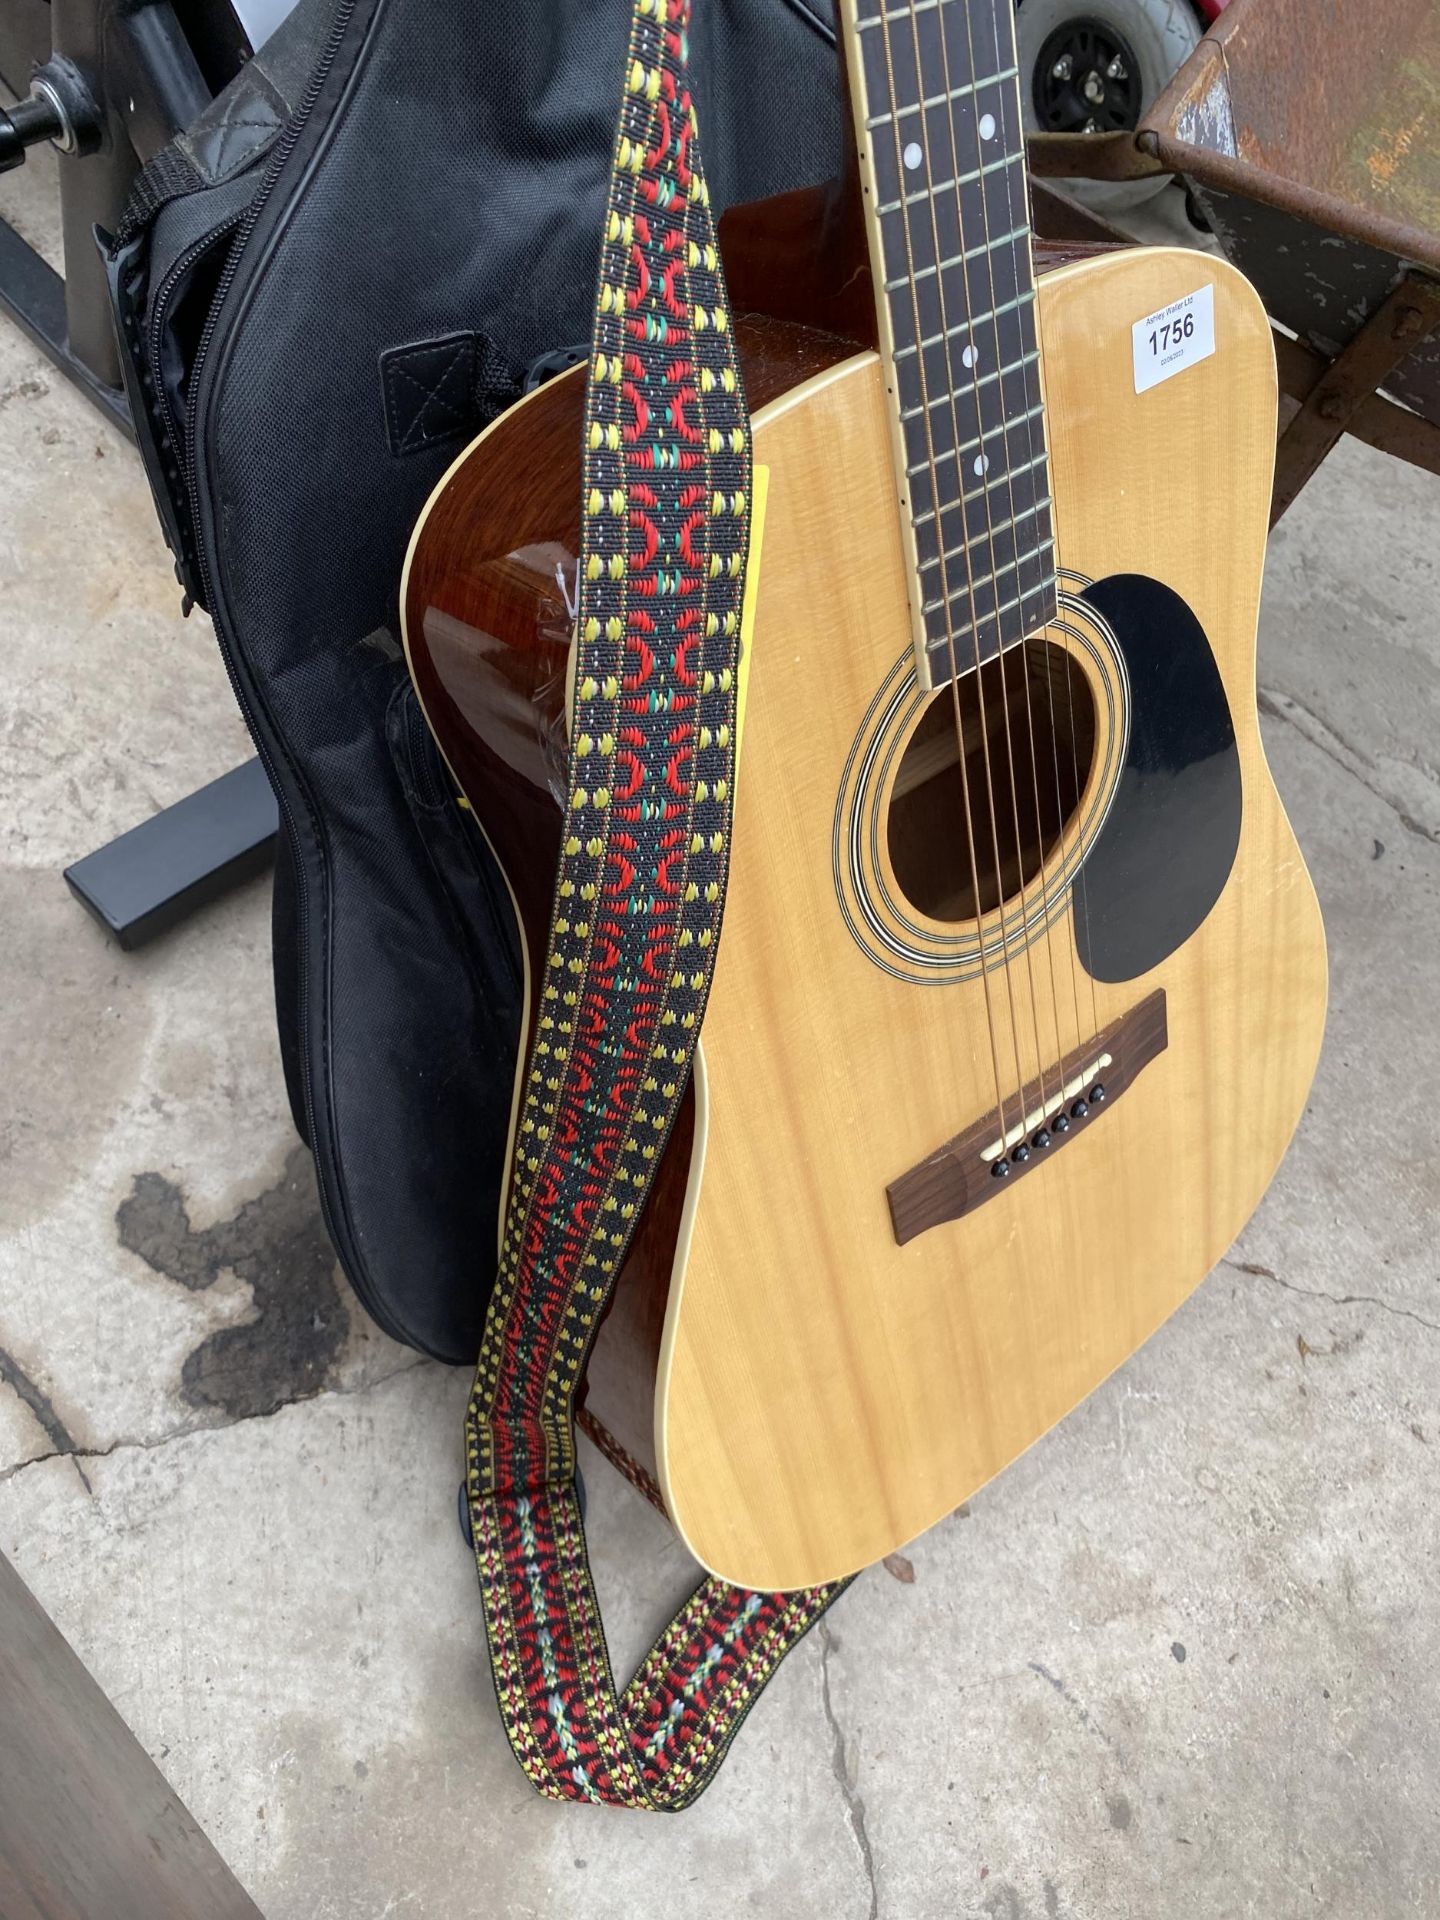 A SAMICK LW-028 GSA ACOUSTIC GUITAR WITH CARRY CASE - Image 3 of 4